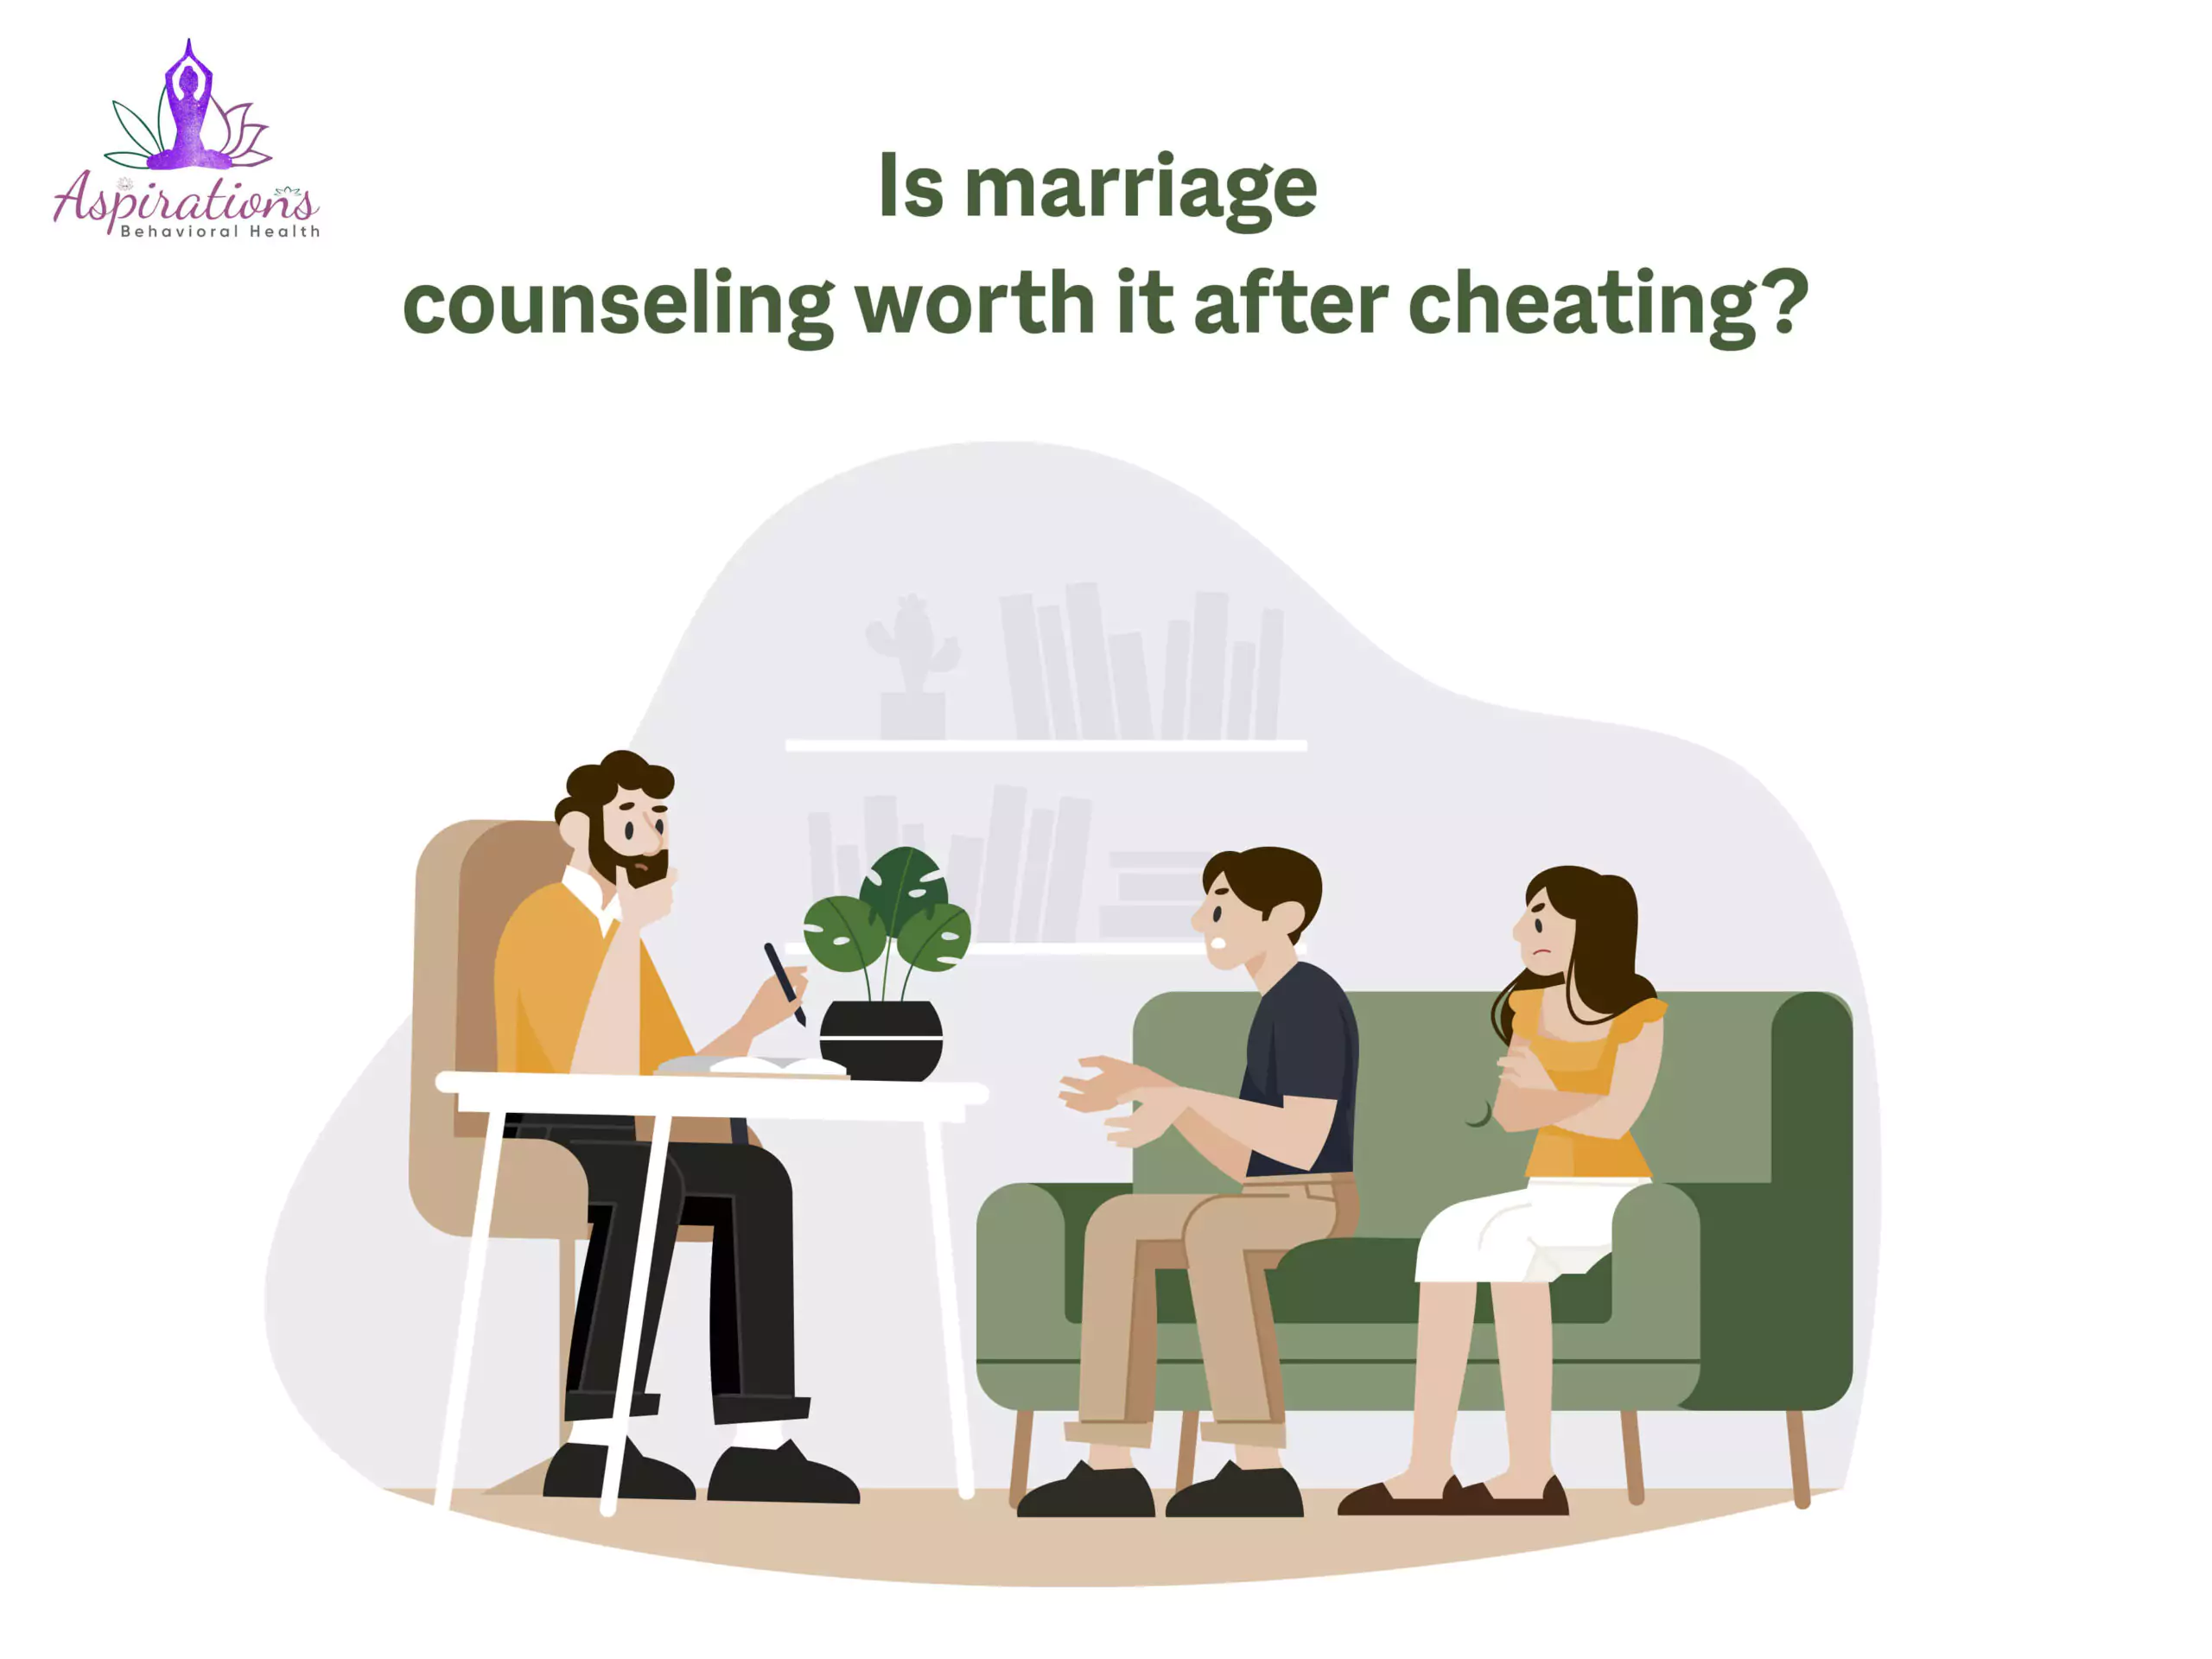 Is marriage counseling worth it after cheating